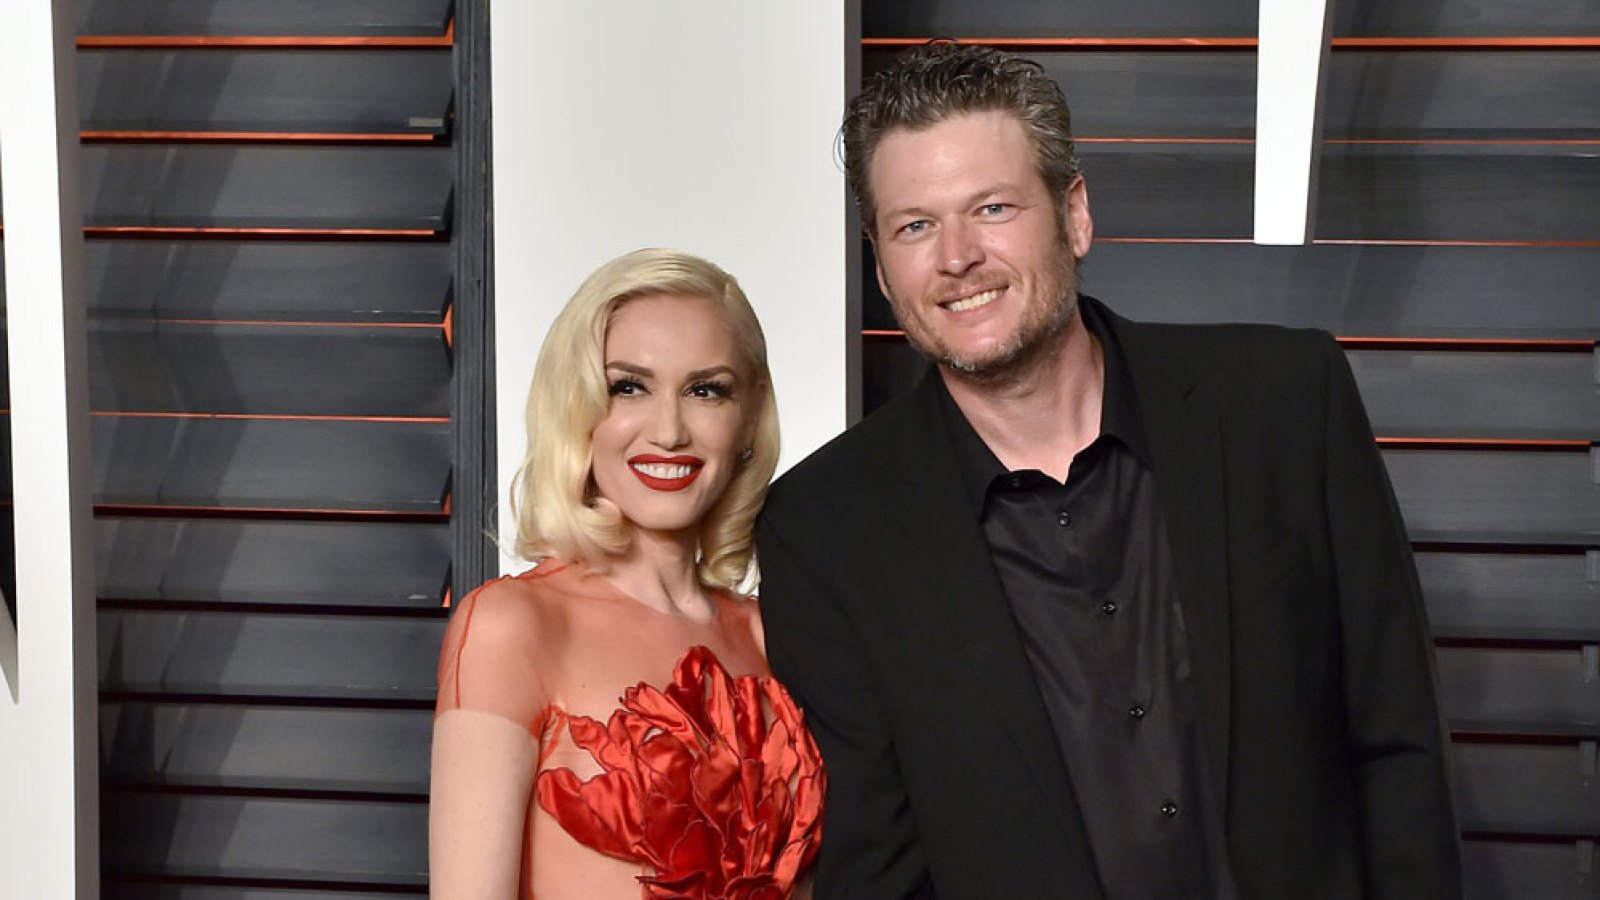 Blake Shelton has opened up about his duet with Gwen Stefani